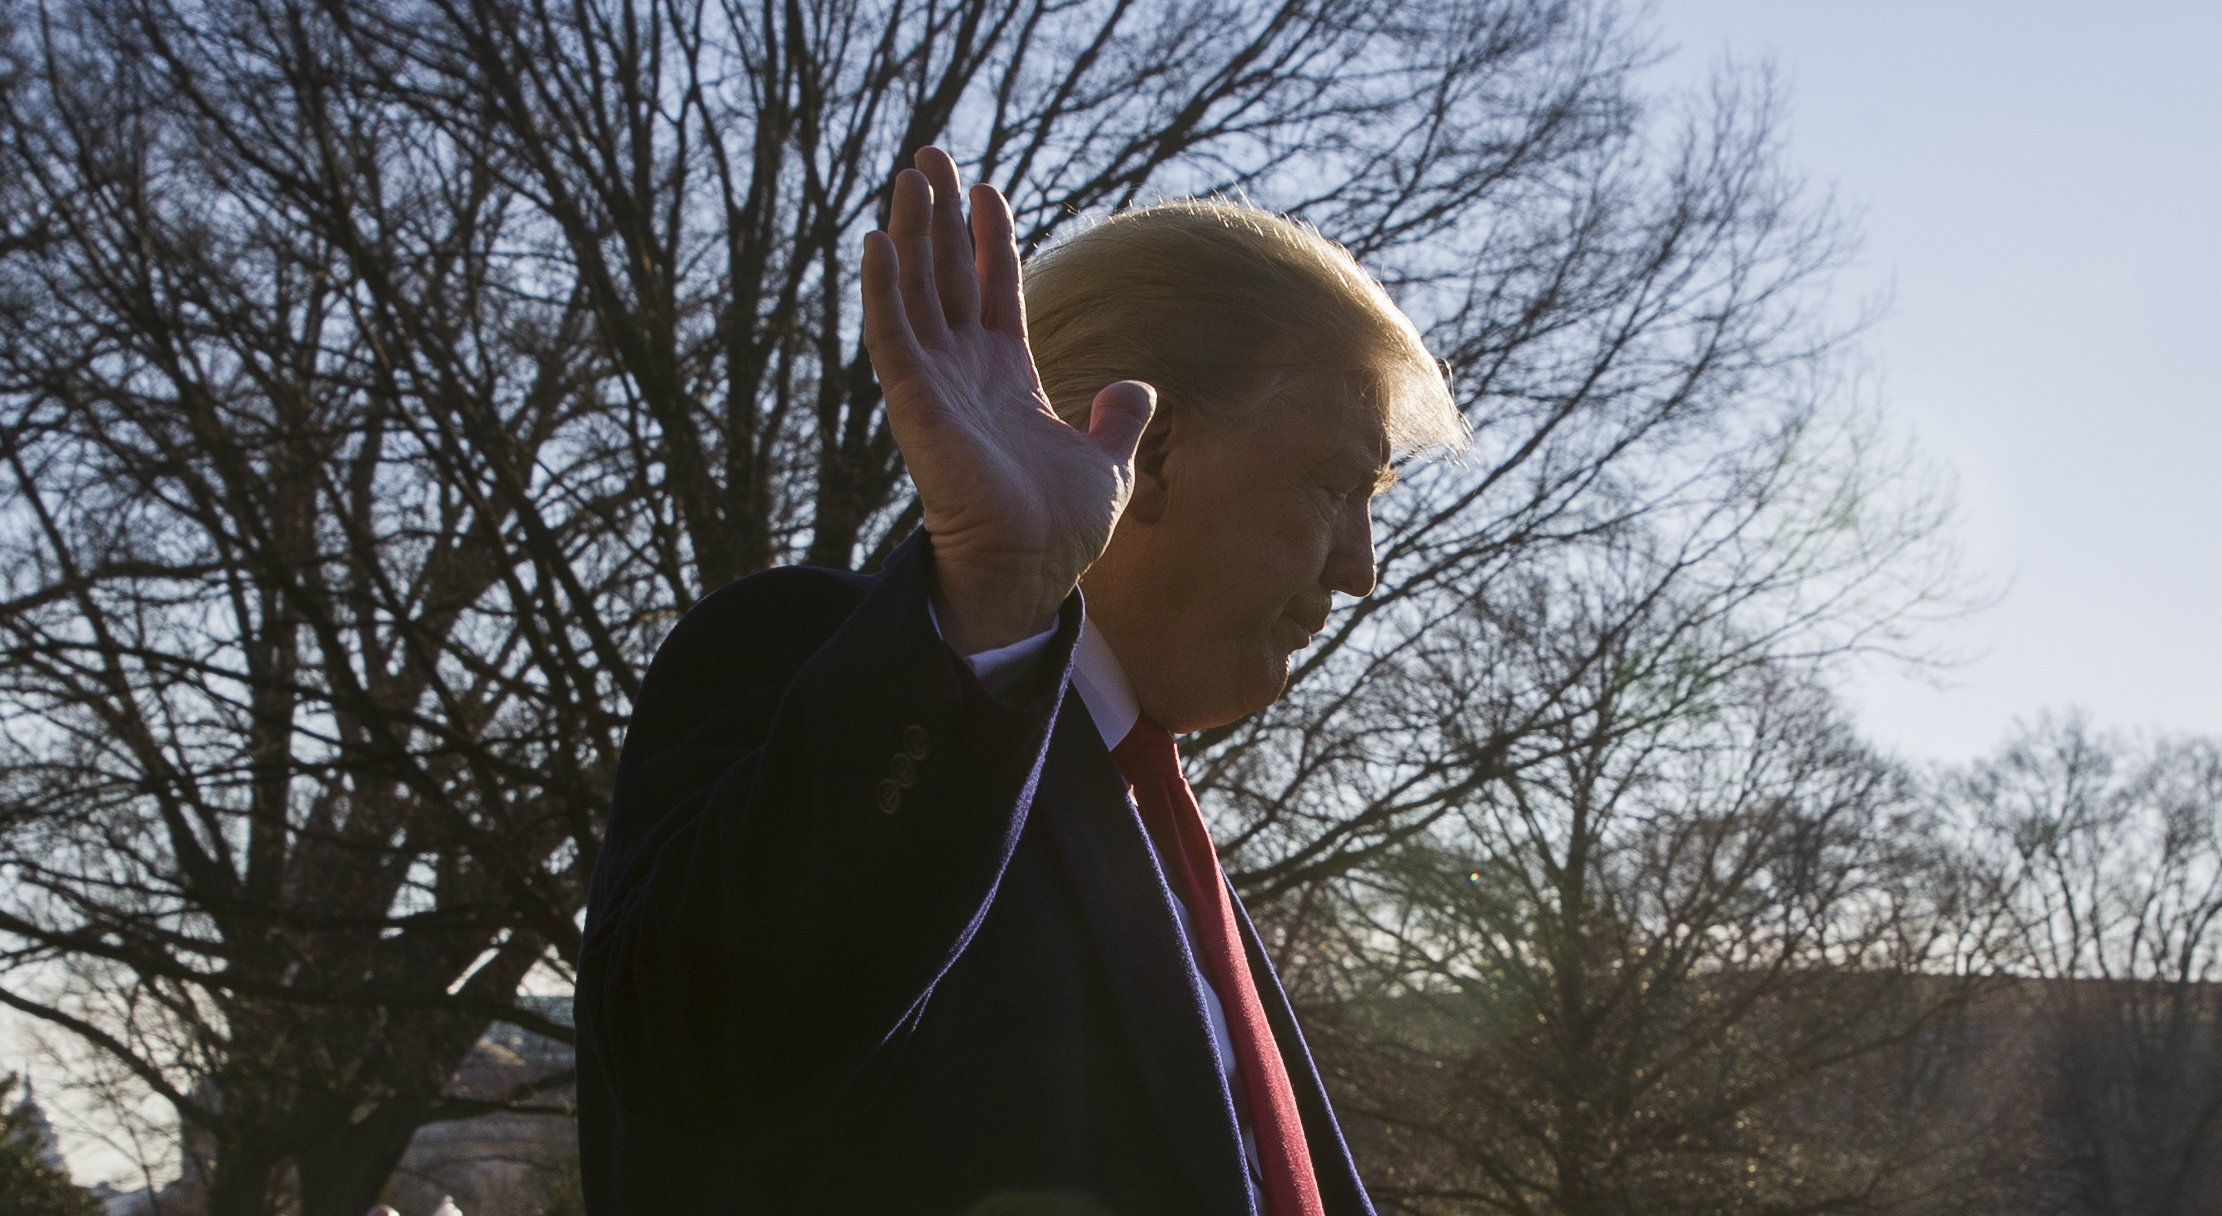  Donald Trump waves as he departs after speaking on the South Lawn of the White House as he walks to Marine One on Sunday.